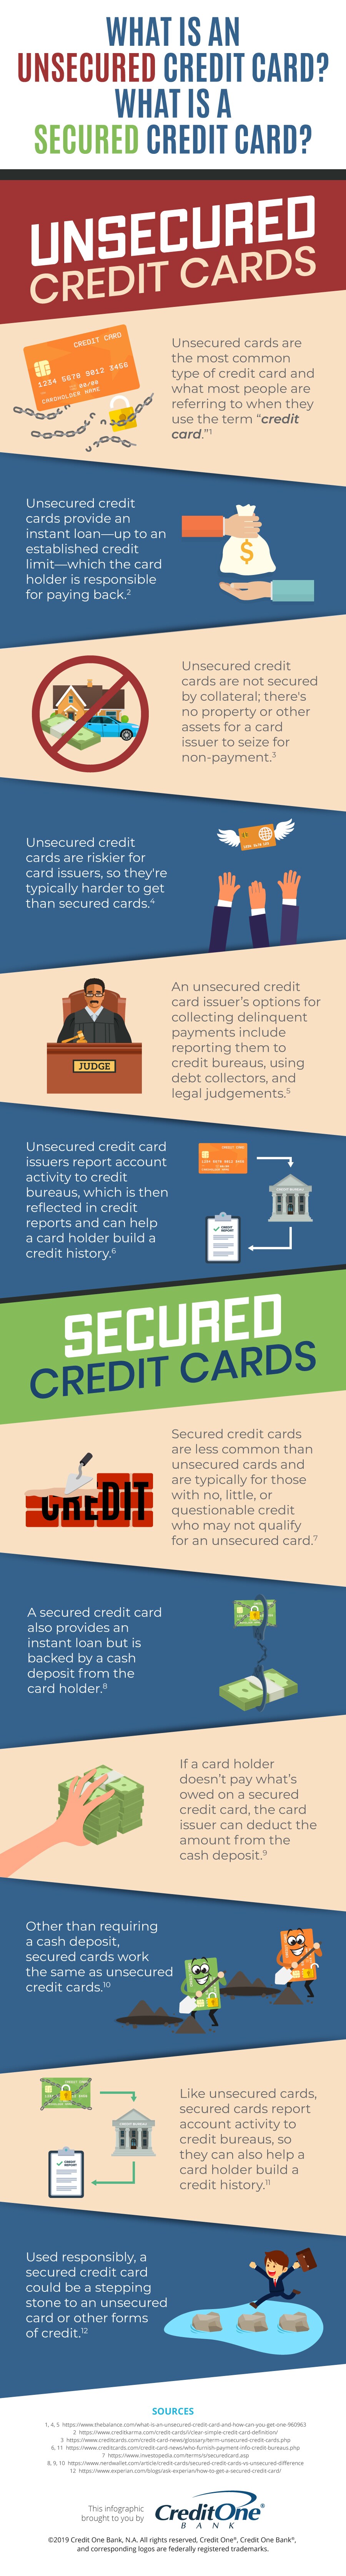 Unsecured Vs Secured Credit Cards Infographic Credit One Bank